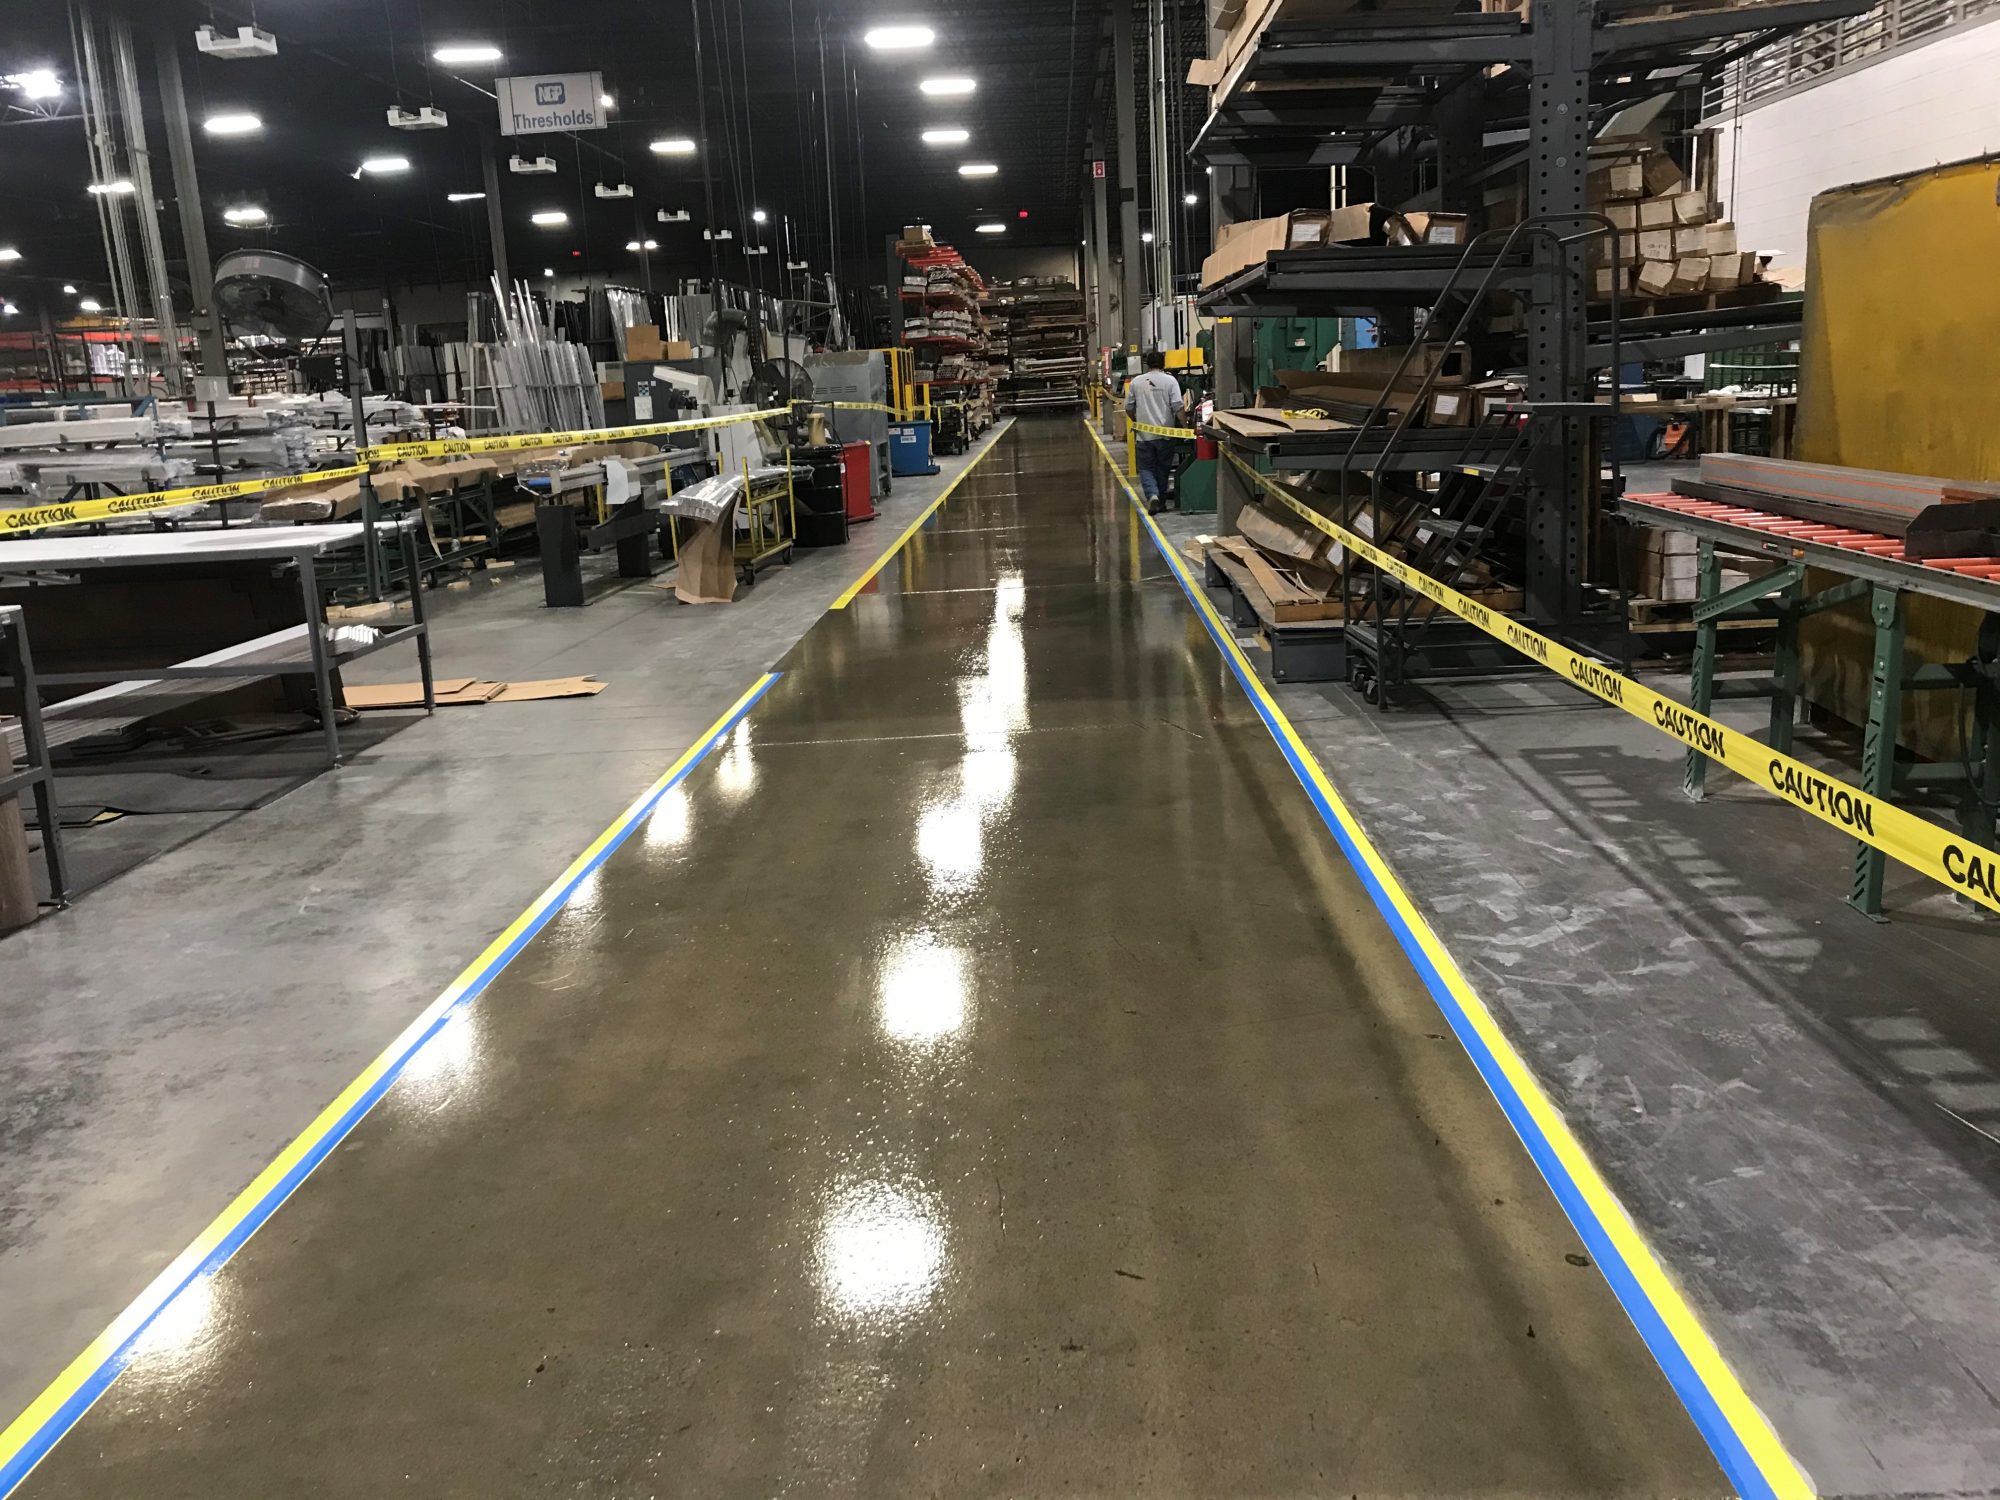 epoxy floor coatings, Concrete aisle coatings, safety striping, 5S, Industrial Applications Inc., IA30yrs, epoxy floor coating, concrete floor coatings